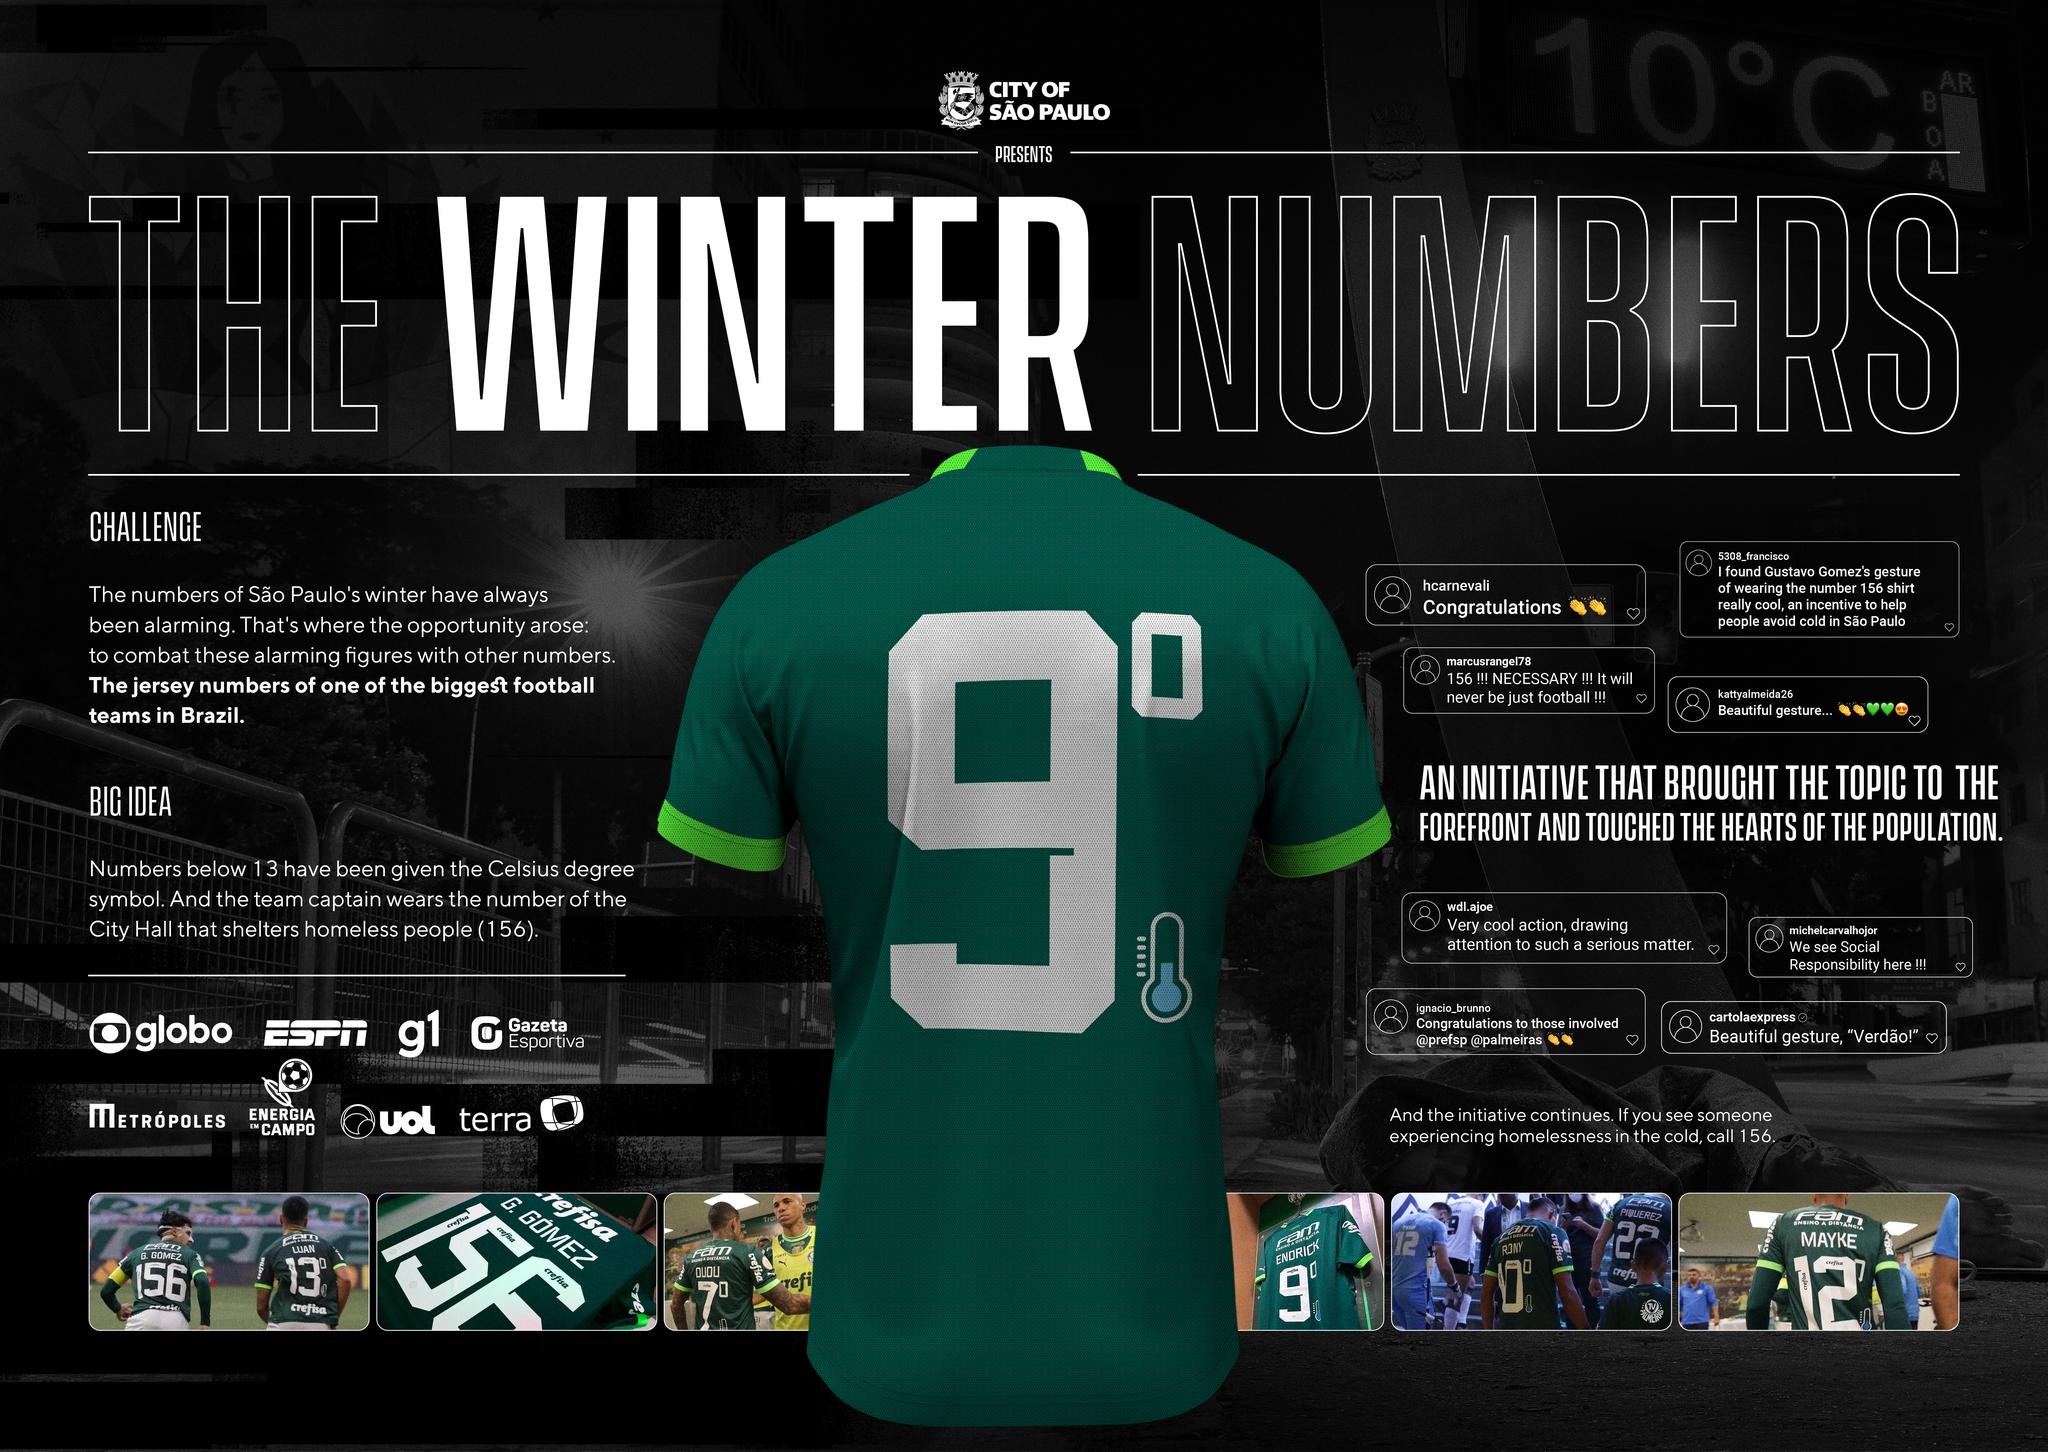 THE WINTER NUMBERS